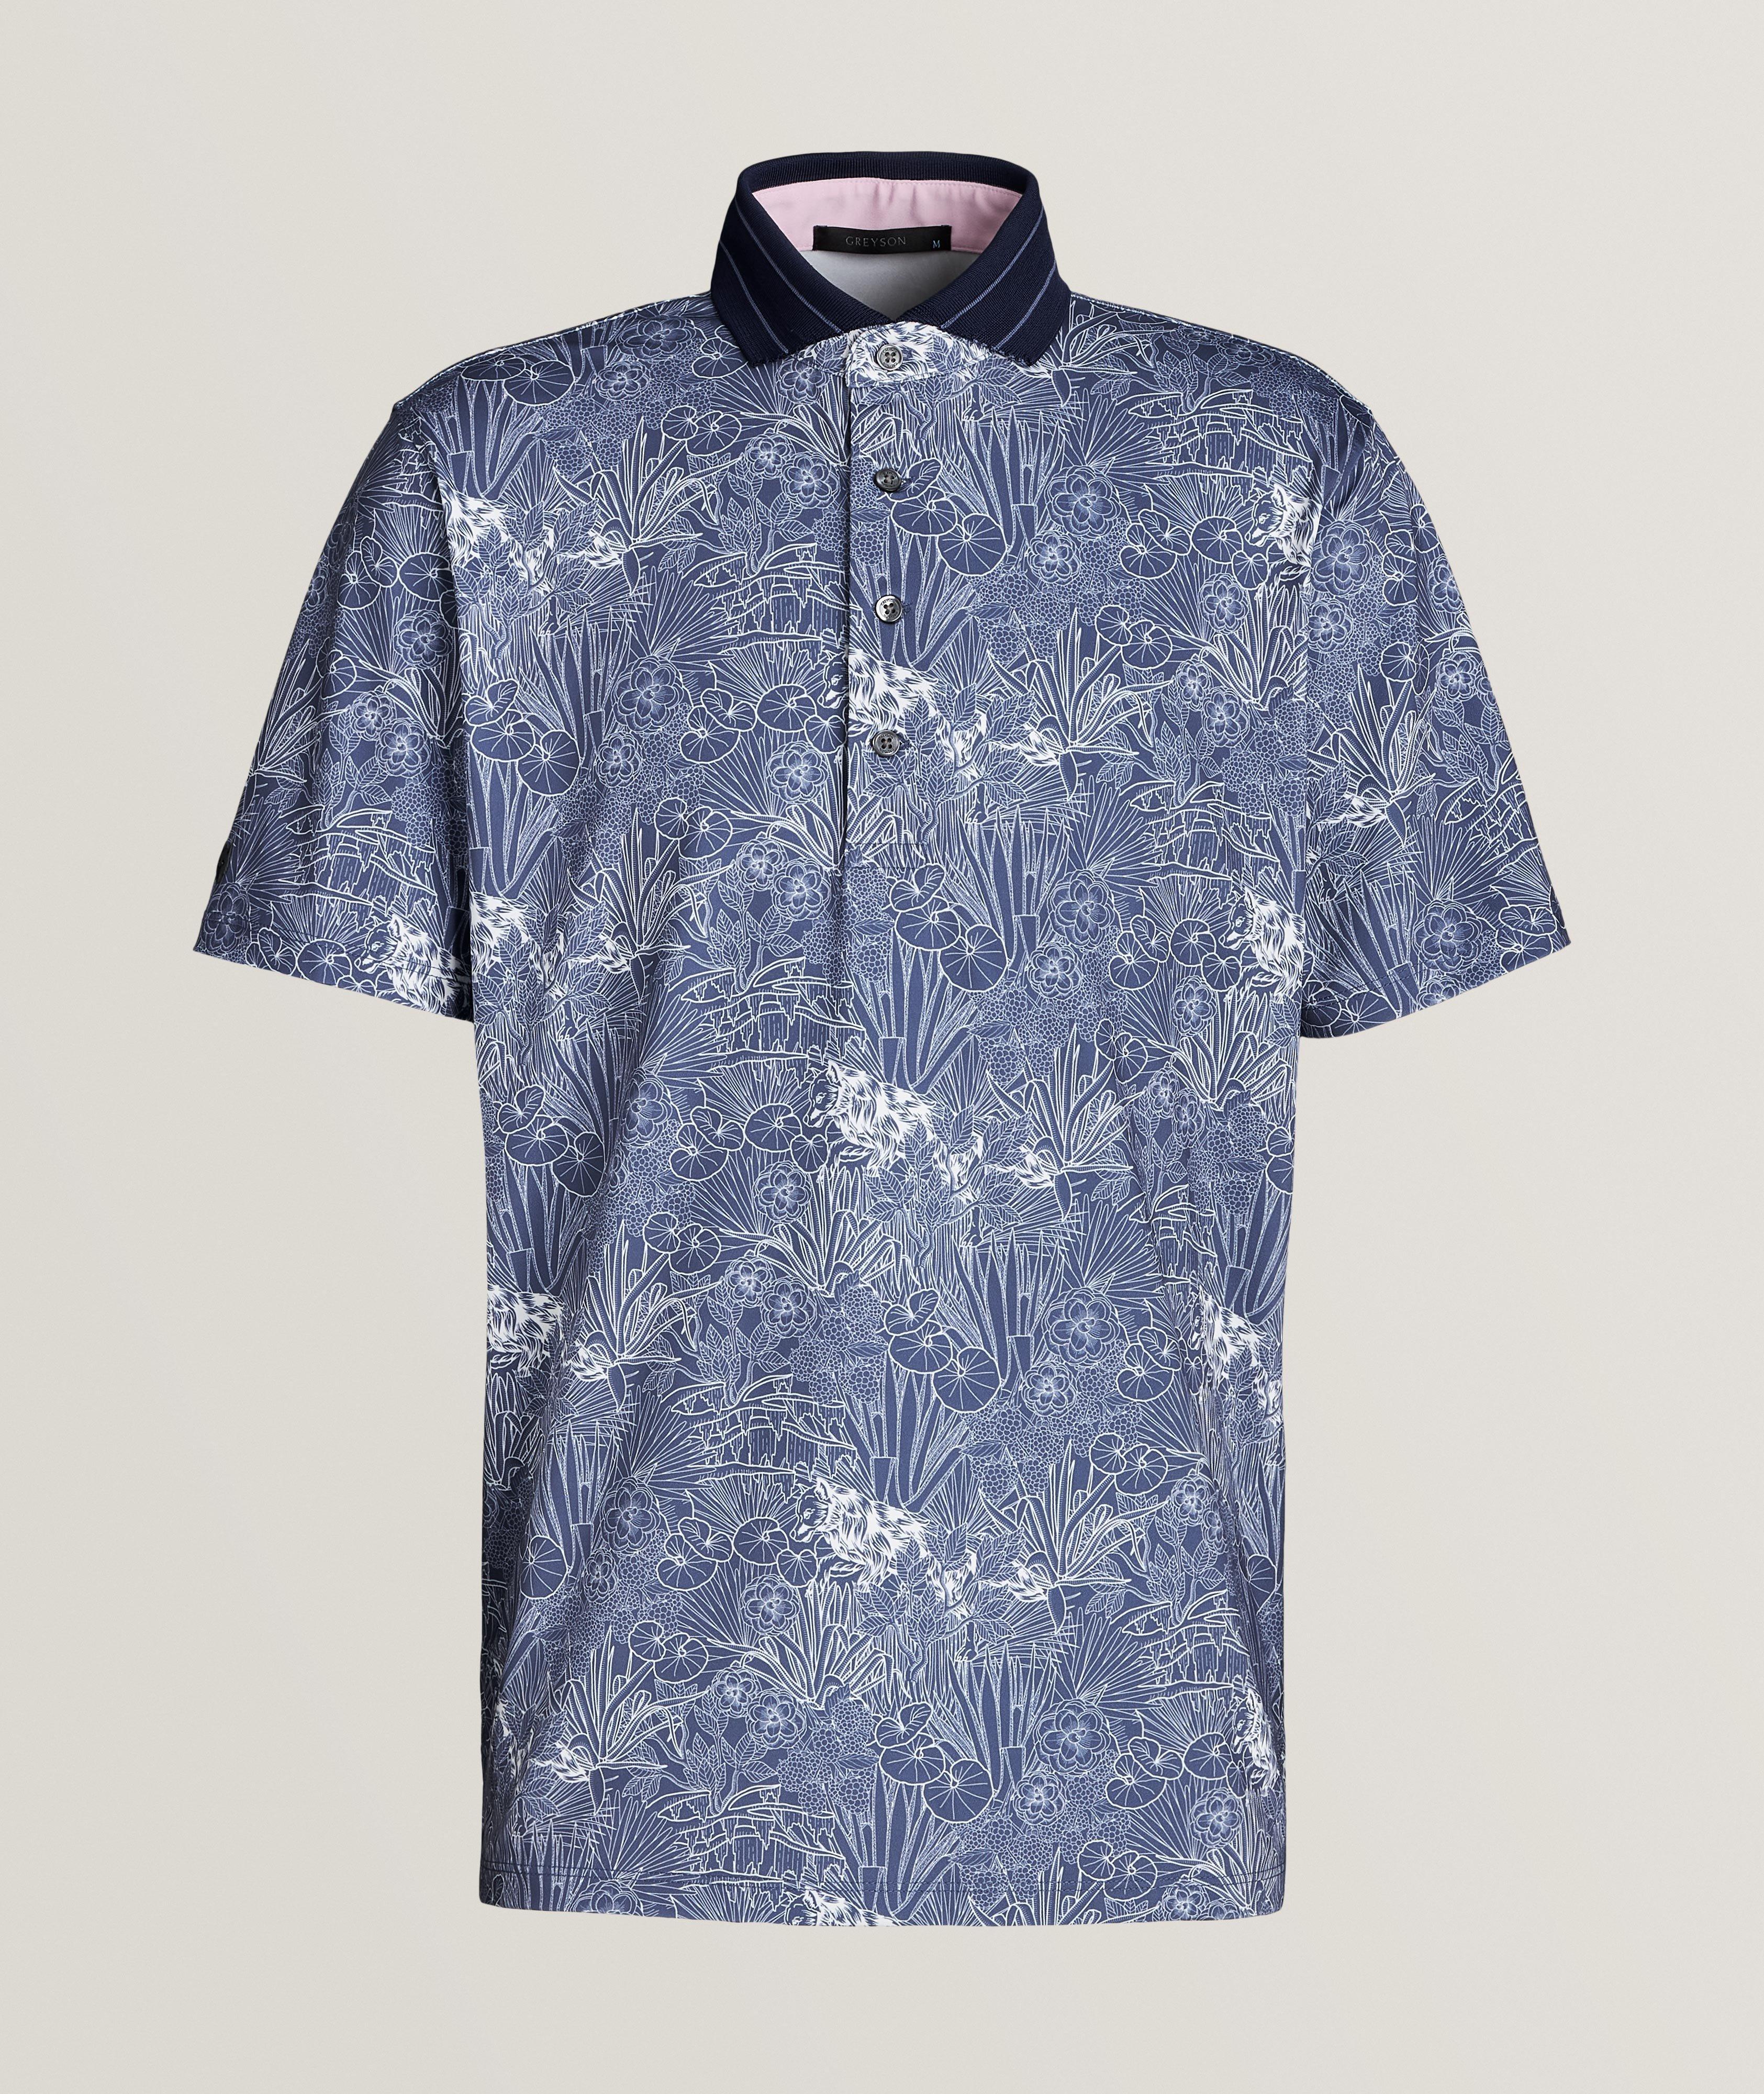 Floral Technical Fabric Polo image 0